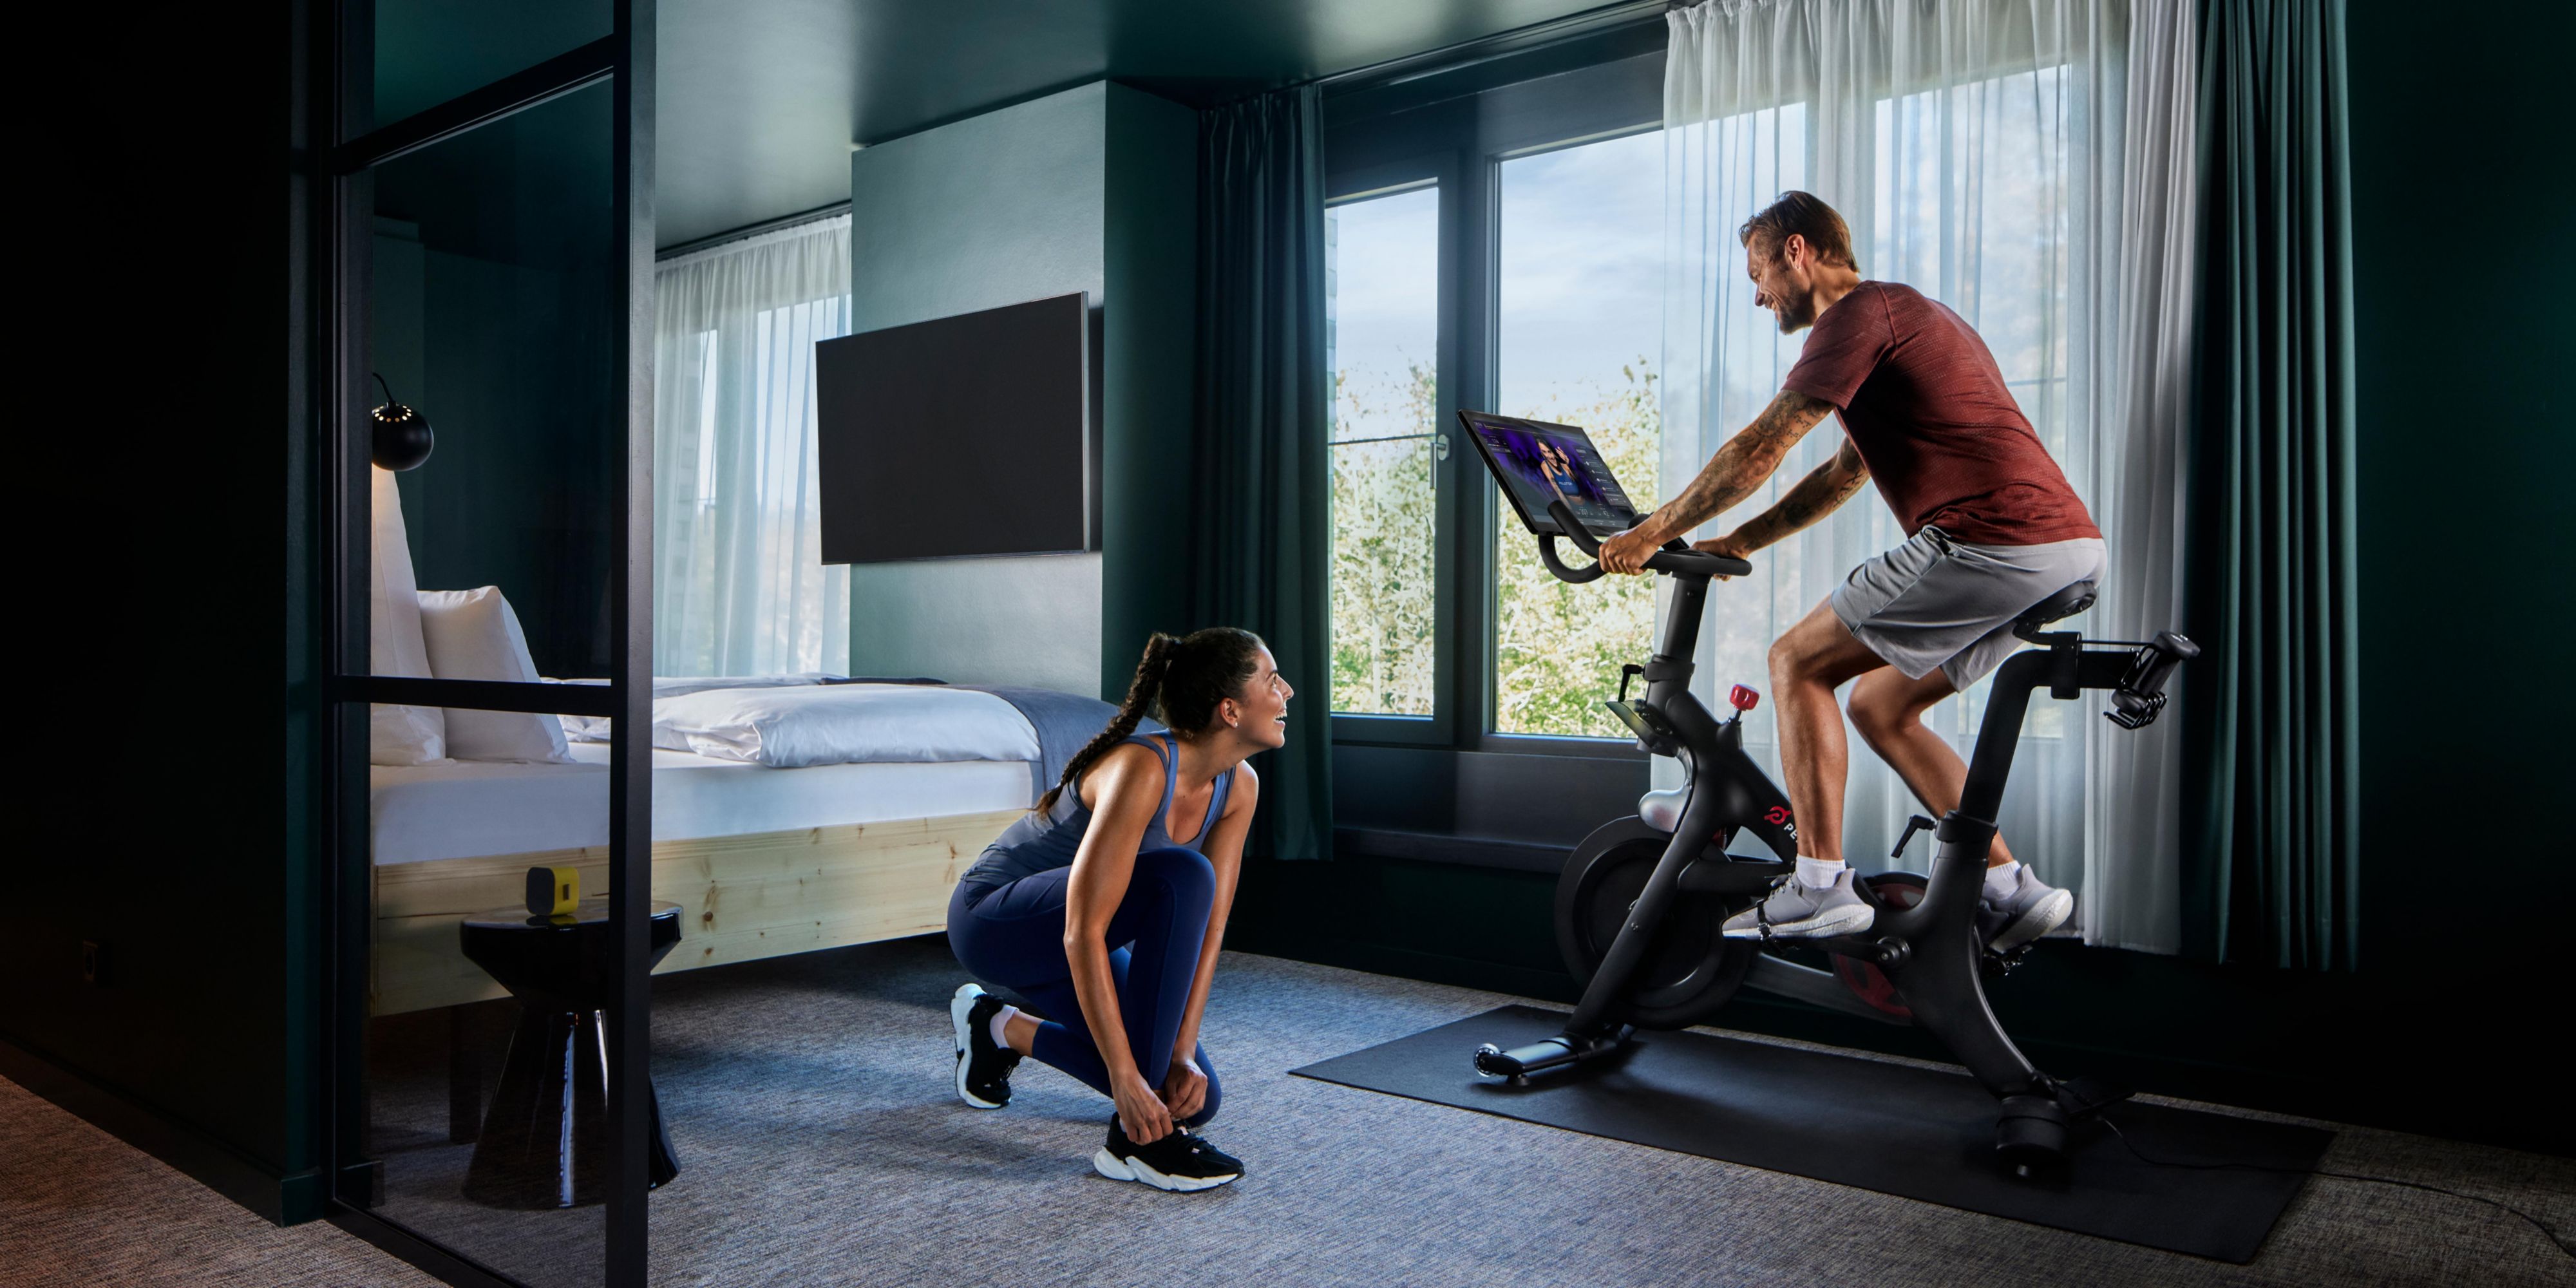 In one of our corner rooms you can enjoy the fitness Peloton Bike with the Berlin city view.
To use the bike you just need to download the free Peloton app,
Surcharge for hotel room applies.